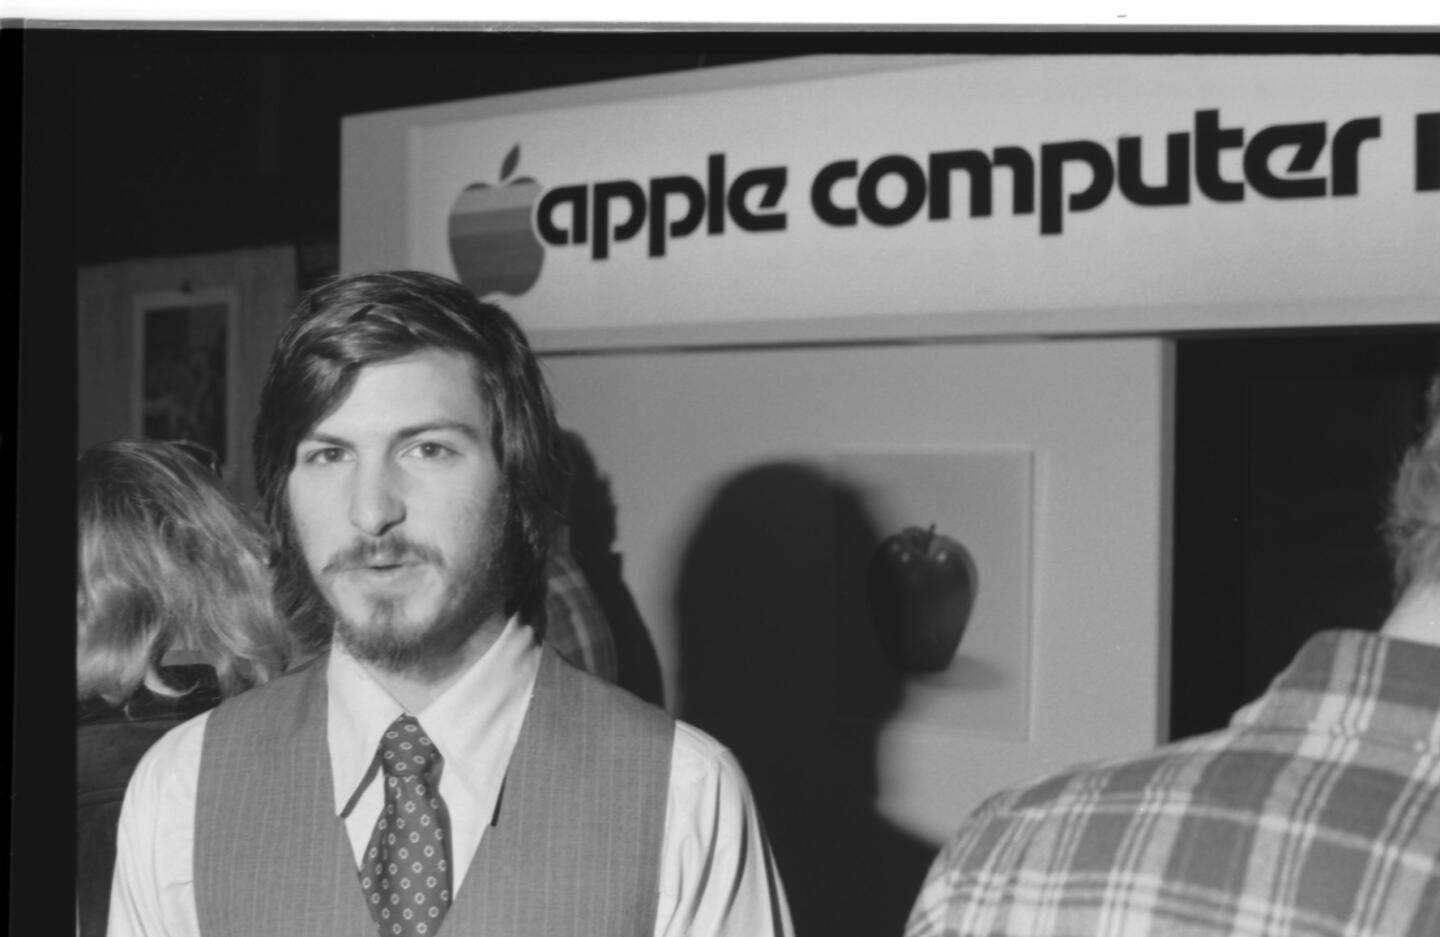 Steve Jobs at the first West Coast Computer Faire, where the Apple II computer was debuted, in Brooks Hall, San Francisco, California in April, 1977.